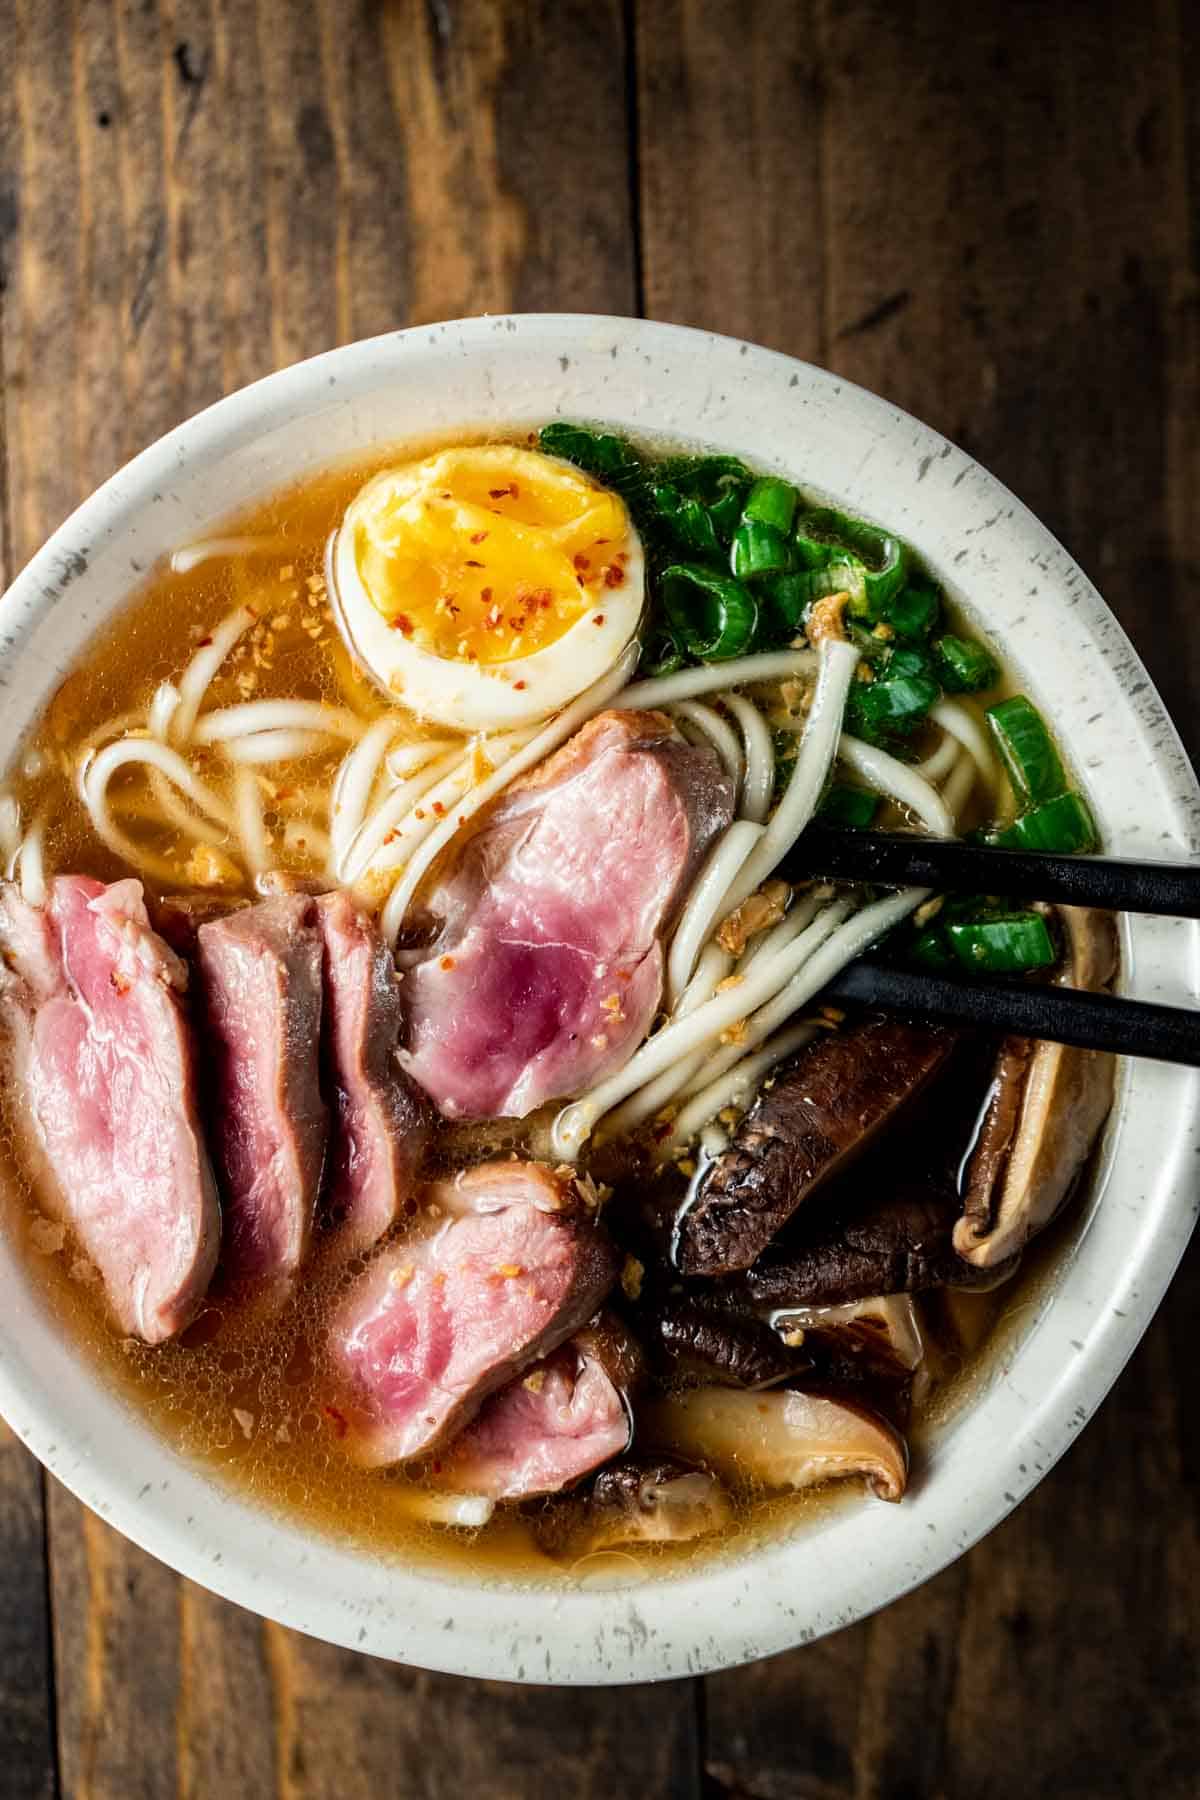 view of duck ramen in a bowl with eggs, duck, noodles, scallions, with black chop sticks